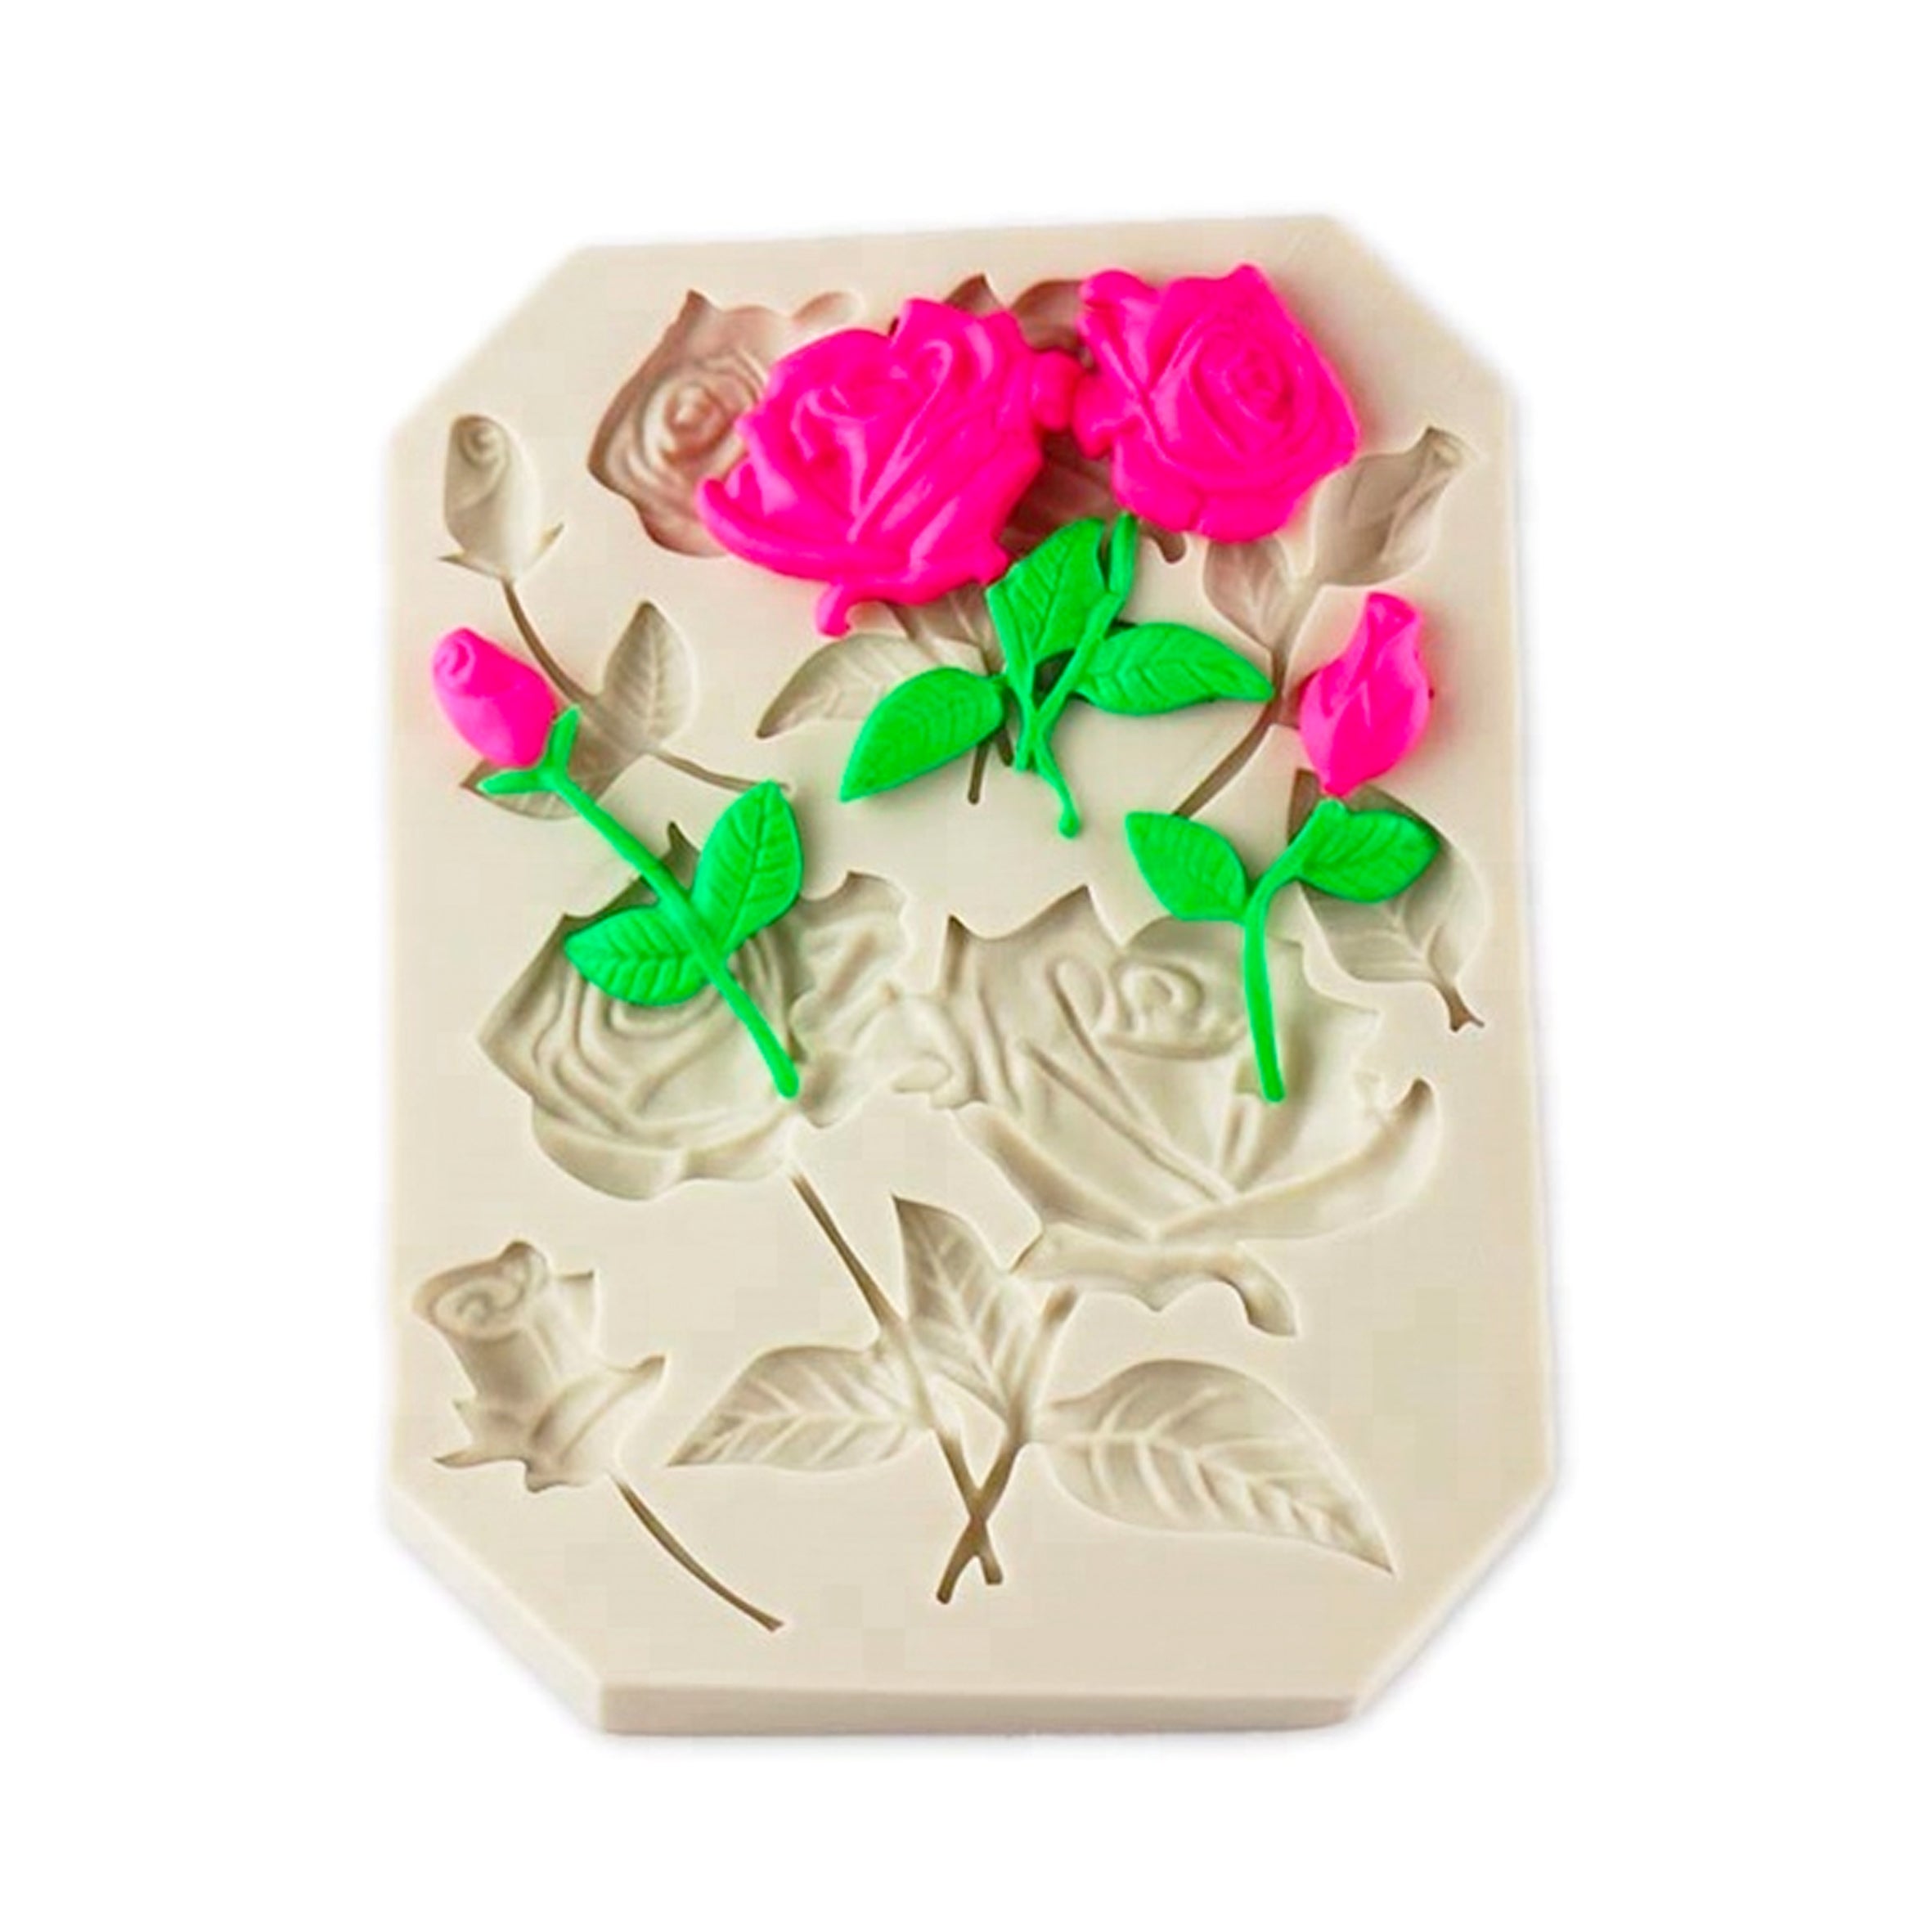 Rose Bud & Stems Shapes Silicone Mould